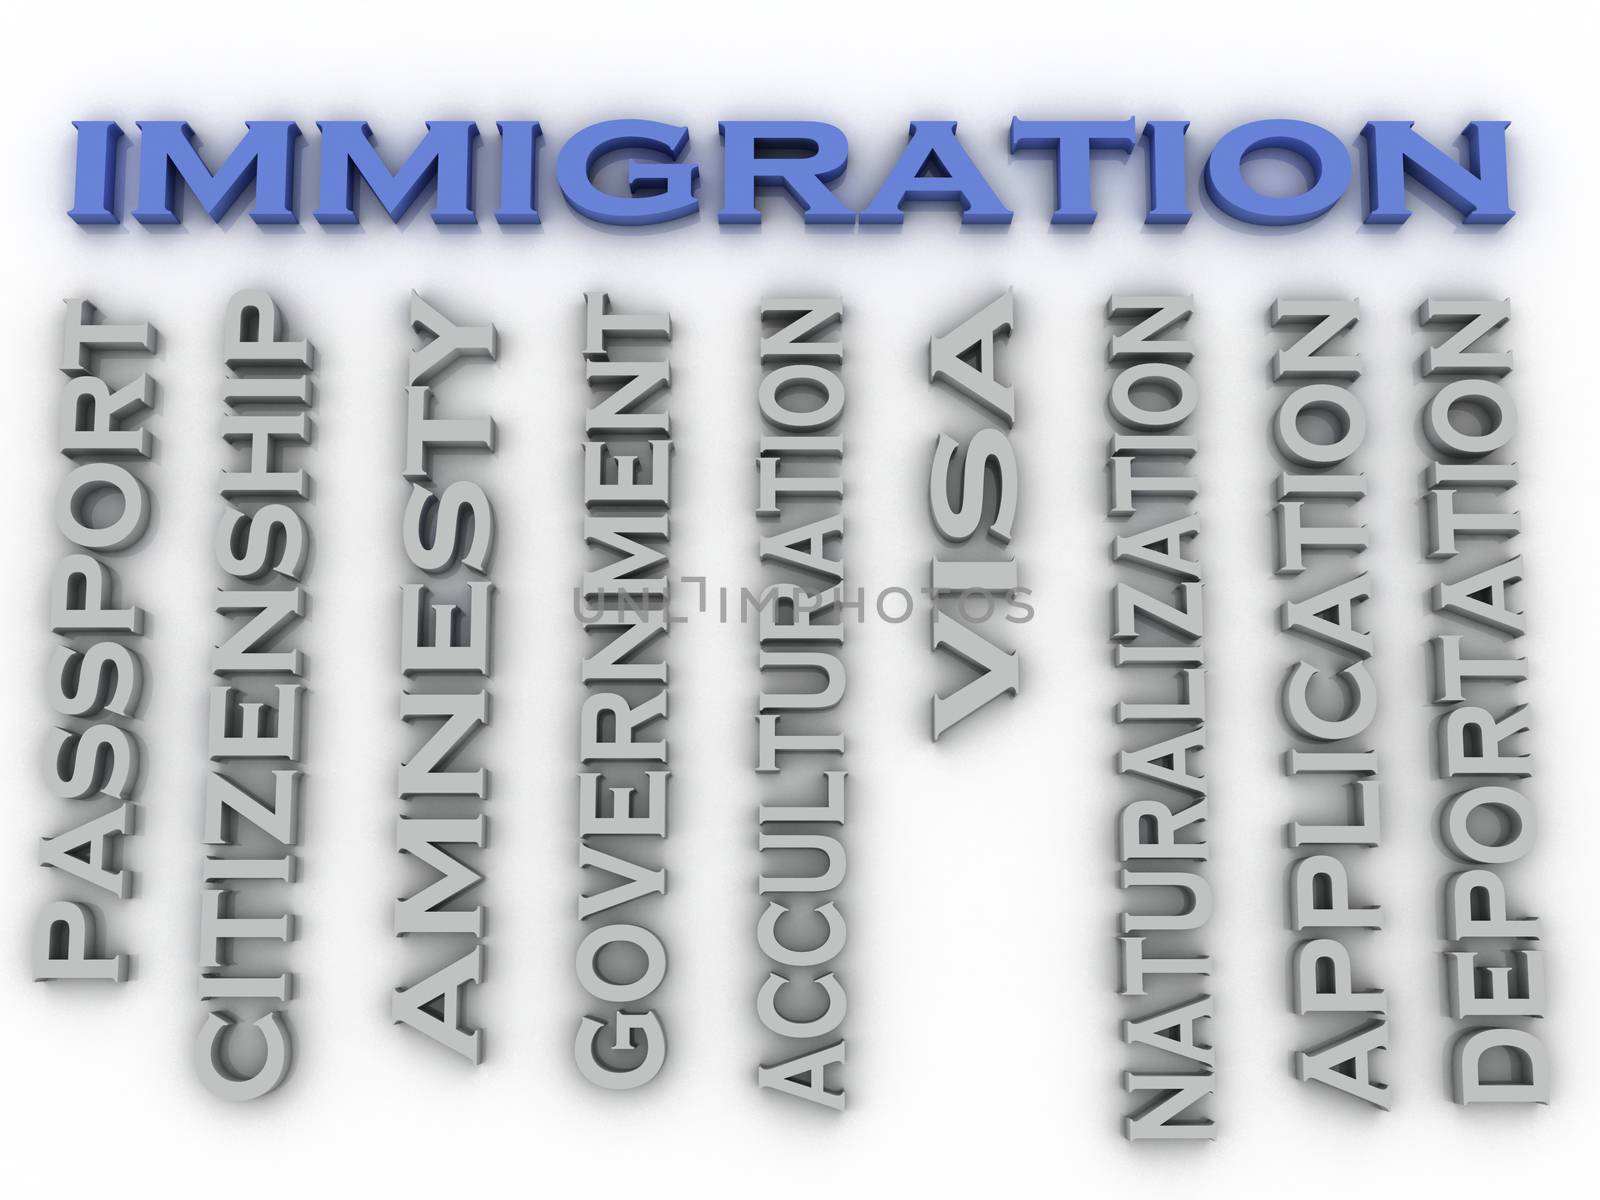 3d image Immigration issues concept word cloud background by dacasdo